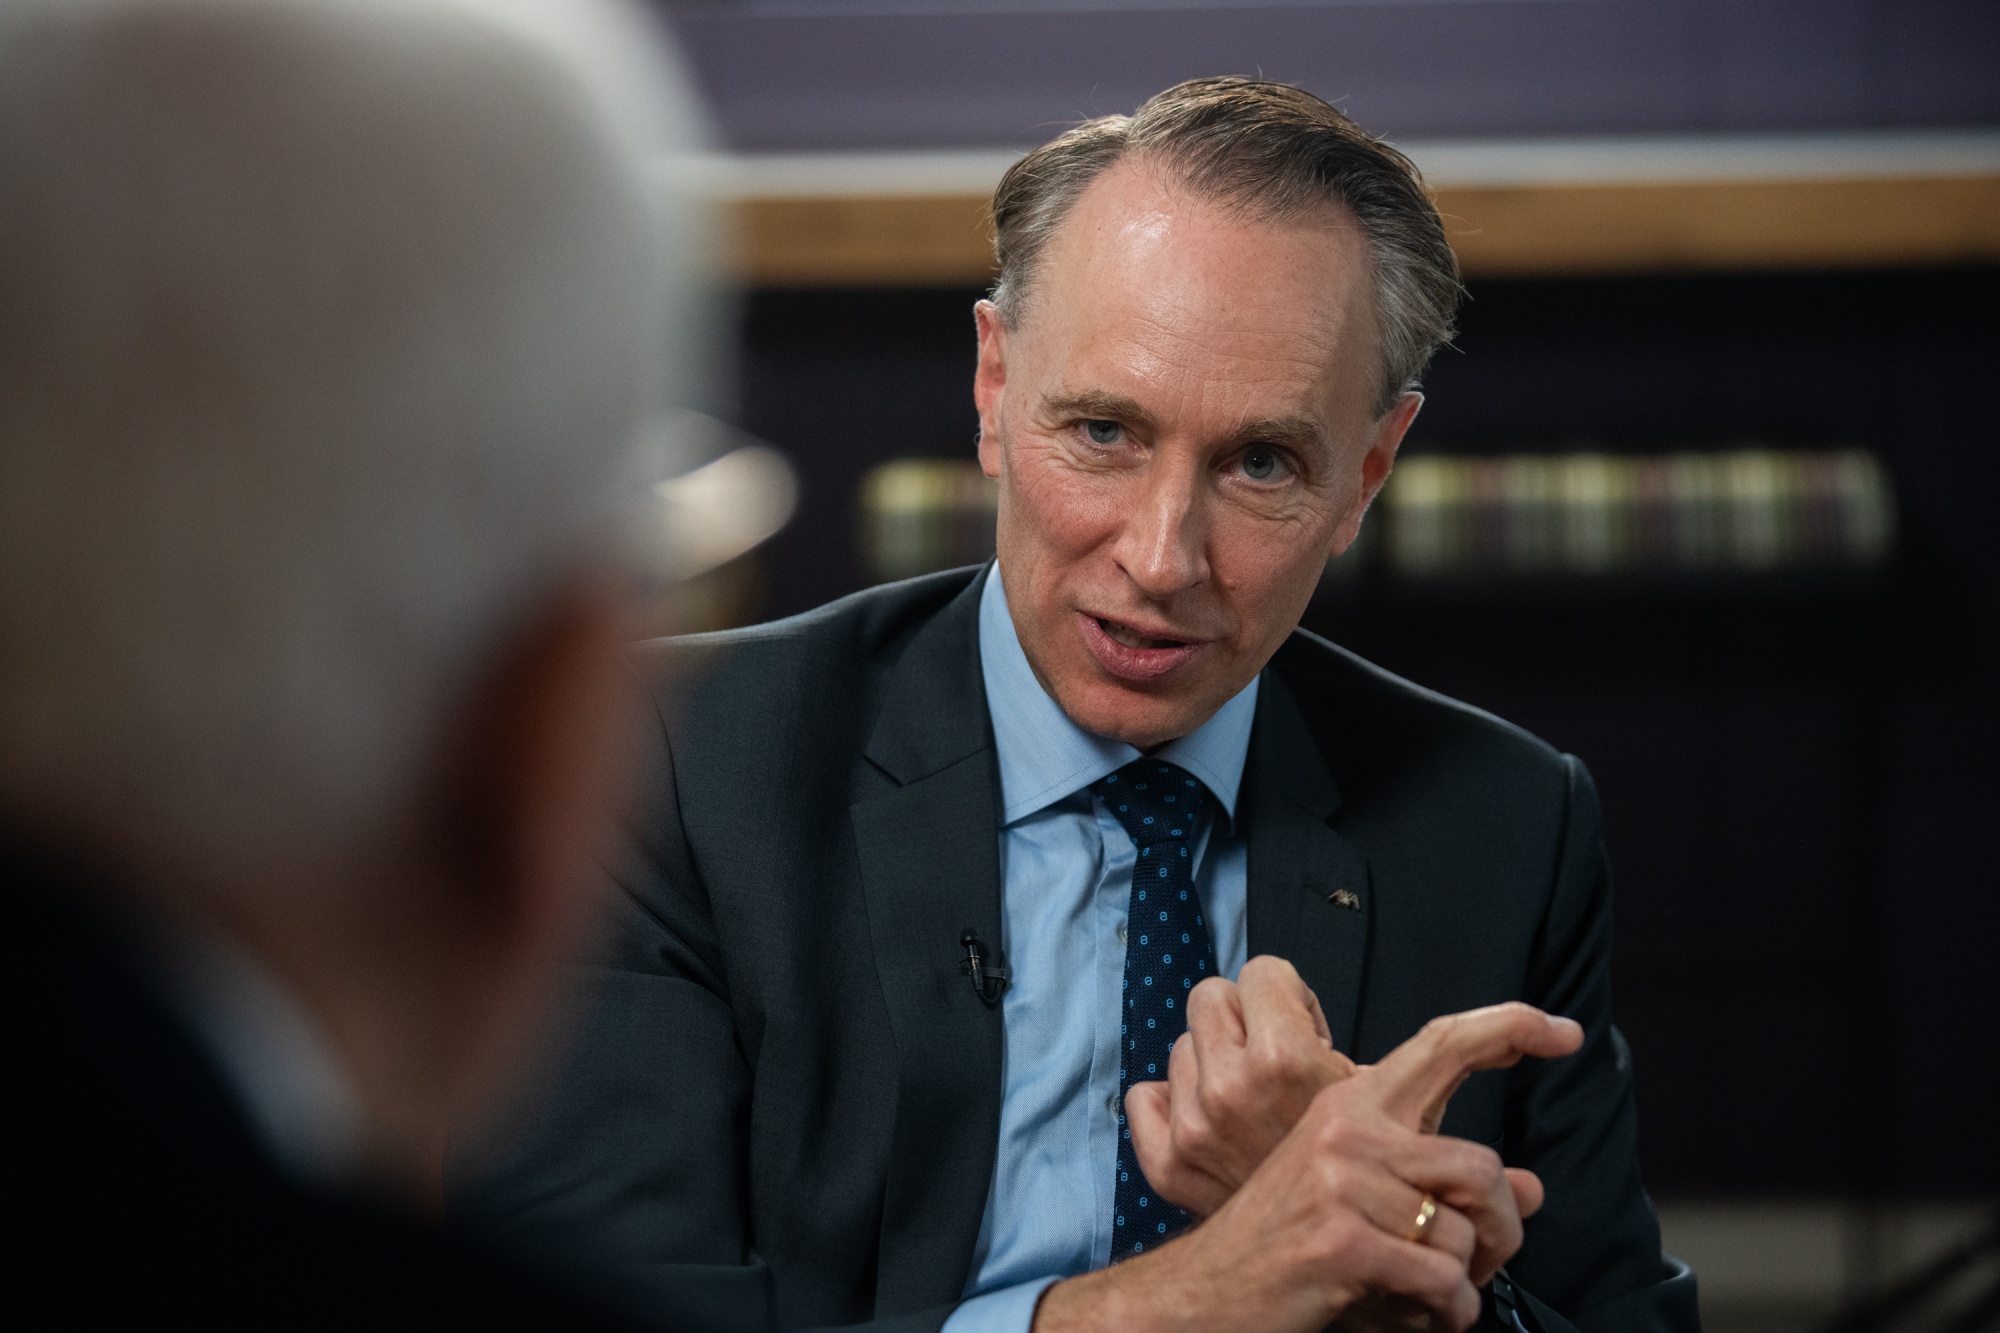 Axa (CS) CEO Thomas Buberl Wants to 'Scale Up' Business - Bloomberg